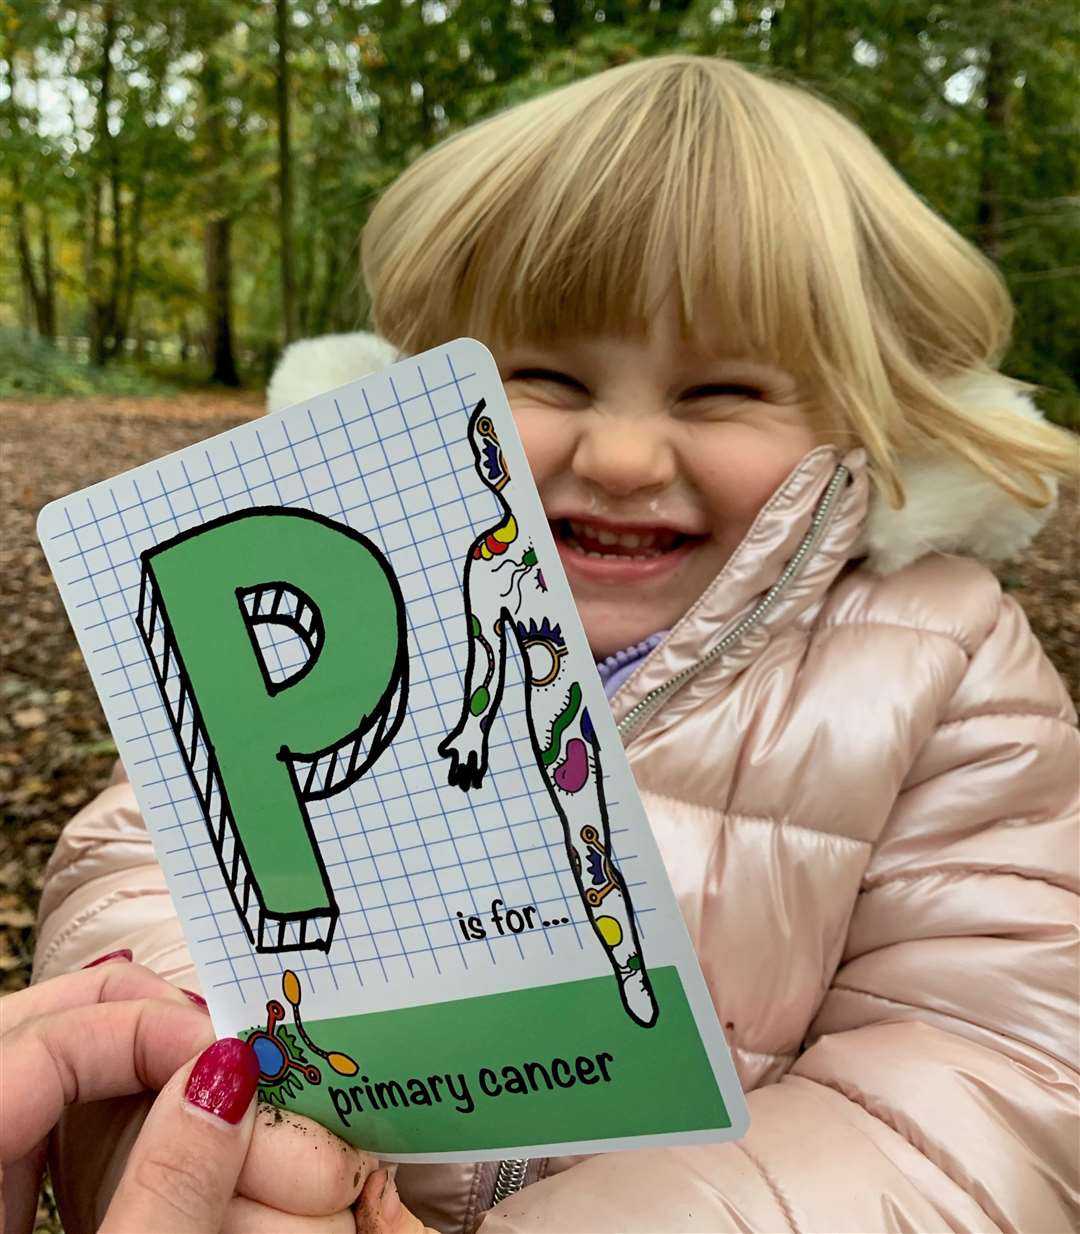 Nic's daughter Poppy with one of the flash cards